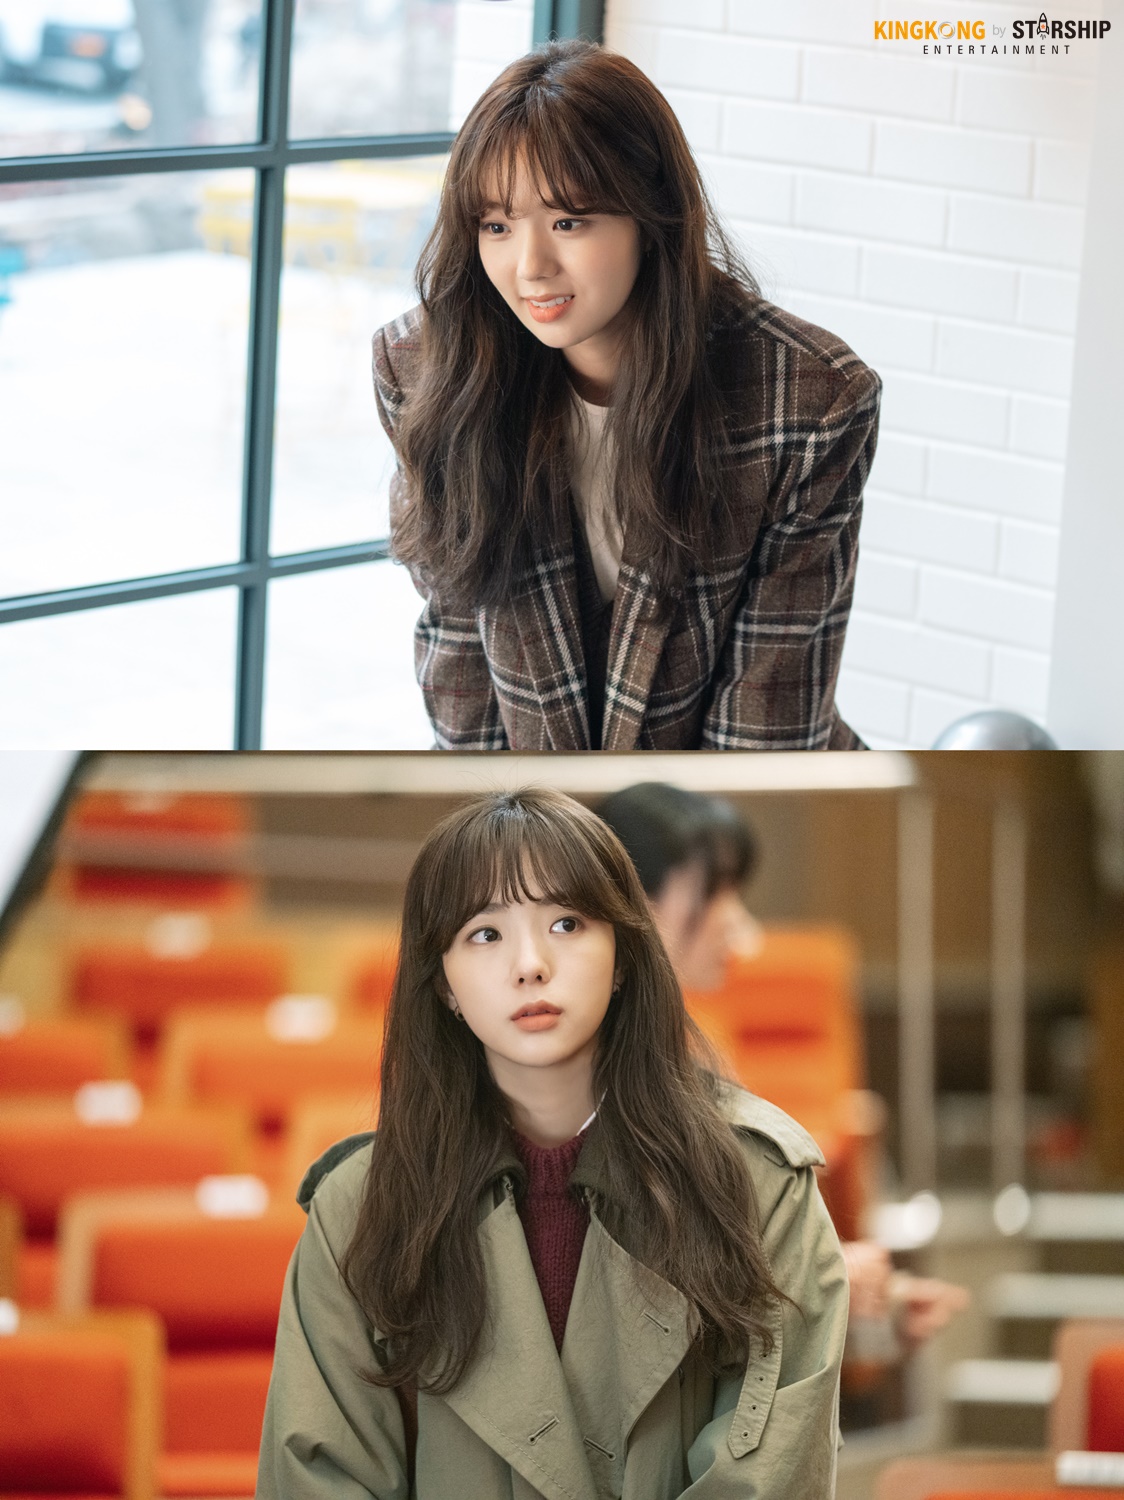 Chae Soo-bin melted perfectly into a semi-semi-semi-semi-semi-semi-semi-semi-semi-semi-semi-semi-semi-semi-semi-semi-semi-semi-semi-semi-semi-semi-semi-On March 30 (Mon), the agency King Kong by Starship released a behind-the-scenes photo of Chae Soo-bin, who is appearing as The Classic recording engineer Han Seo Woo in TVN Mon-Tue drama Ban Eui-ban (director Lee Sang-yeop/playplayplay by Lee Sook-yeon/Produced Studio Dragon/Produce The Unicorn, Movie Rock).Chae Soo-bin in the public photo naturally catches the eye with a warm visual wearing a check pattern jacket in a wave-gin hairstyle.His warm and lovely smile toward his opponent Actor reveals the warm personality of Seo Woo, who deeply sympathizes and devotes his heart to others.In the meantime, Chae Soo-bin in the following photos is looking around the theater with curious eyes.Seo Woo is a character who always tries his best as a Classic recording engineer and follows the dream.Chae Soo-bin is the back door of meticulously analyzing and exploring characters to express such a Seo Woo.Chae Soo-bin completely melted into the role of Seo Woo in half-class and attracted viewers favorable comments from the first broadcast.He delicately depicted the complex emotional lines such as joy, sadness, and despair of the person and delivered them to the house theater.In addition, Chae Soo-bins warm and faint voice was expressed in deeper emotion in harmony with the dramas ambassadors.Chae Soo-bin, who is showing such a suction-powered act, is more excited about his performance in the half-half in the future.TVN Mon-Tue drama half-class will be broadcast on Monday, March 30 at 9 pm.